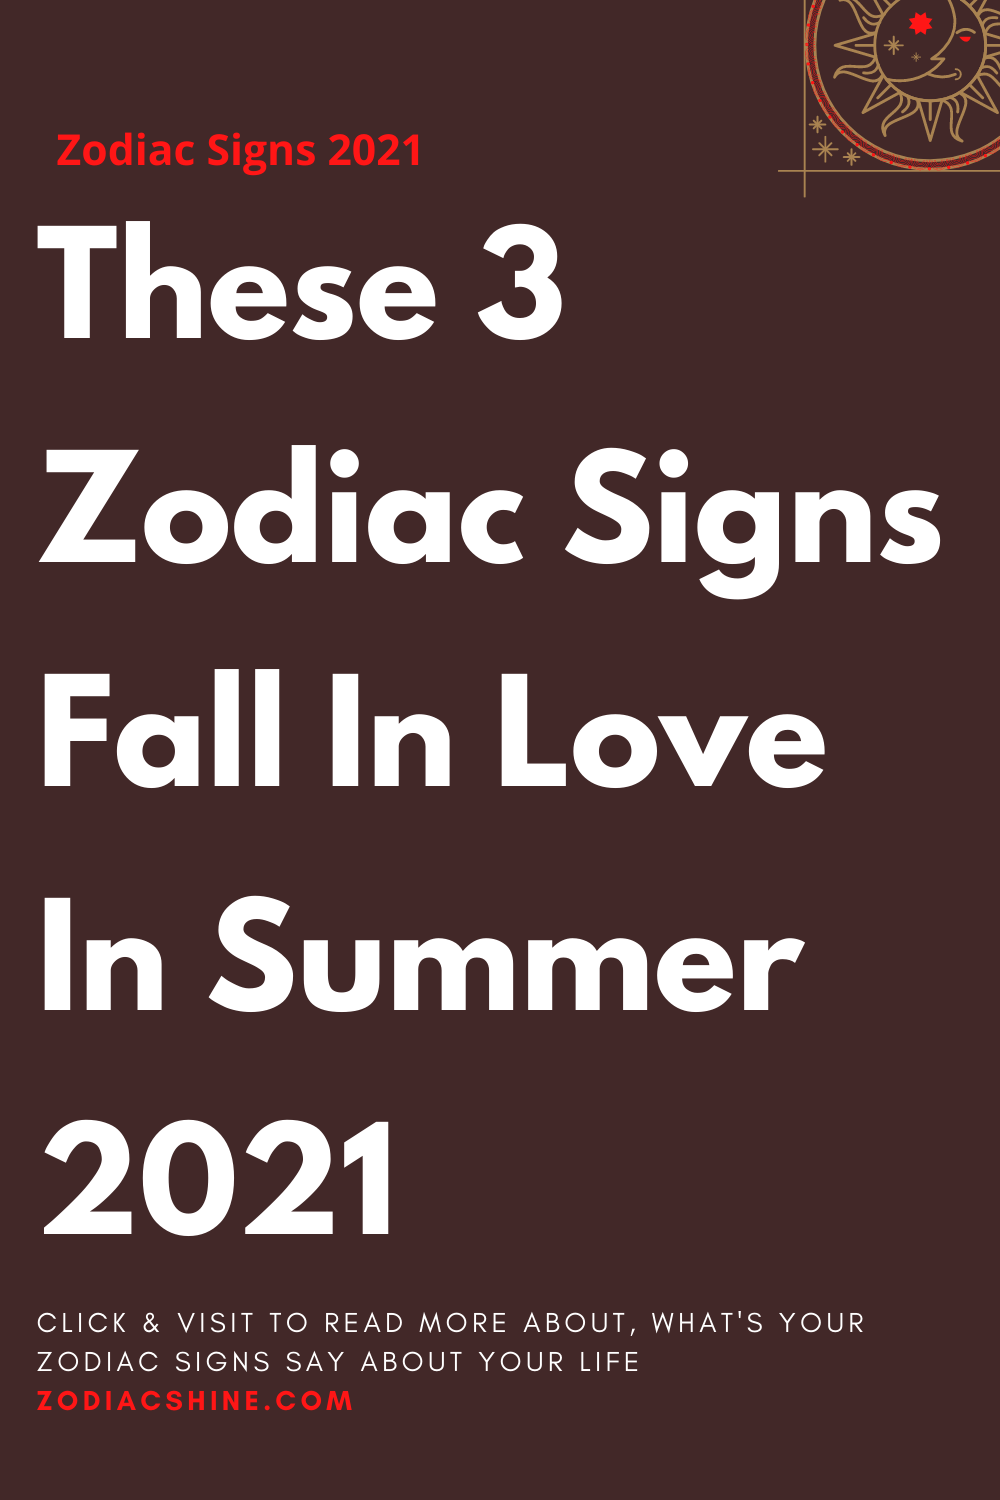 These 3 Zodiac Signs Fall In Love In Summer 2021